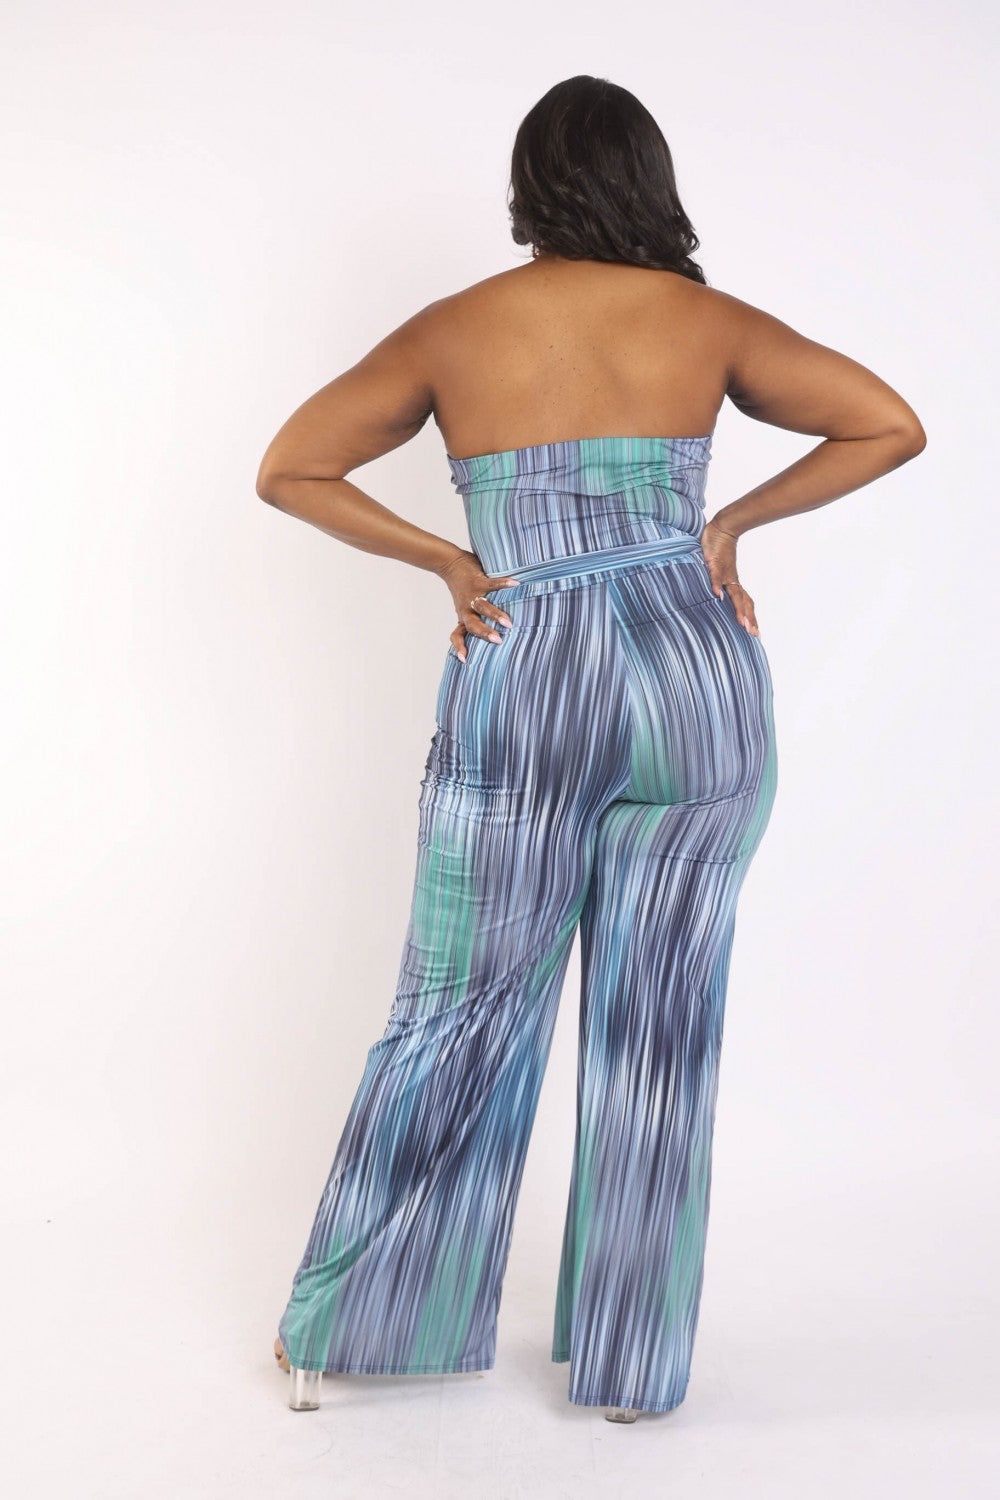 Printed Tube Jumpsuit With Self Belt | Blue, Orange, PLUS SIZE, PLUS SIZE JUMPSUITS & ROMPERS, SALE, SALE PLUS SIZE | Bodiied